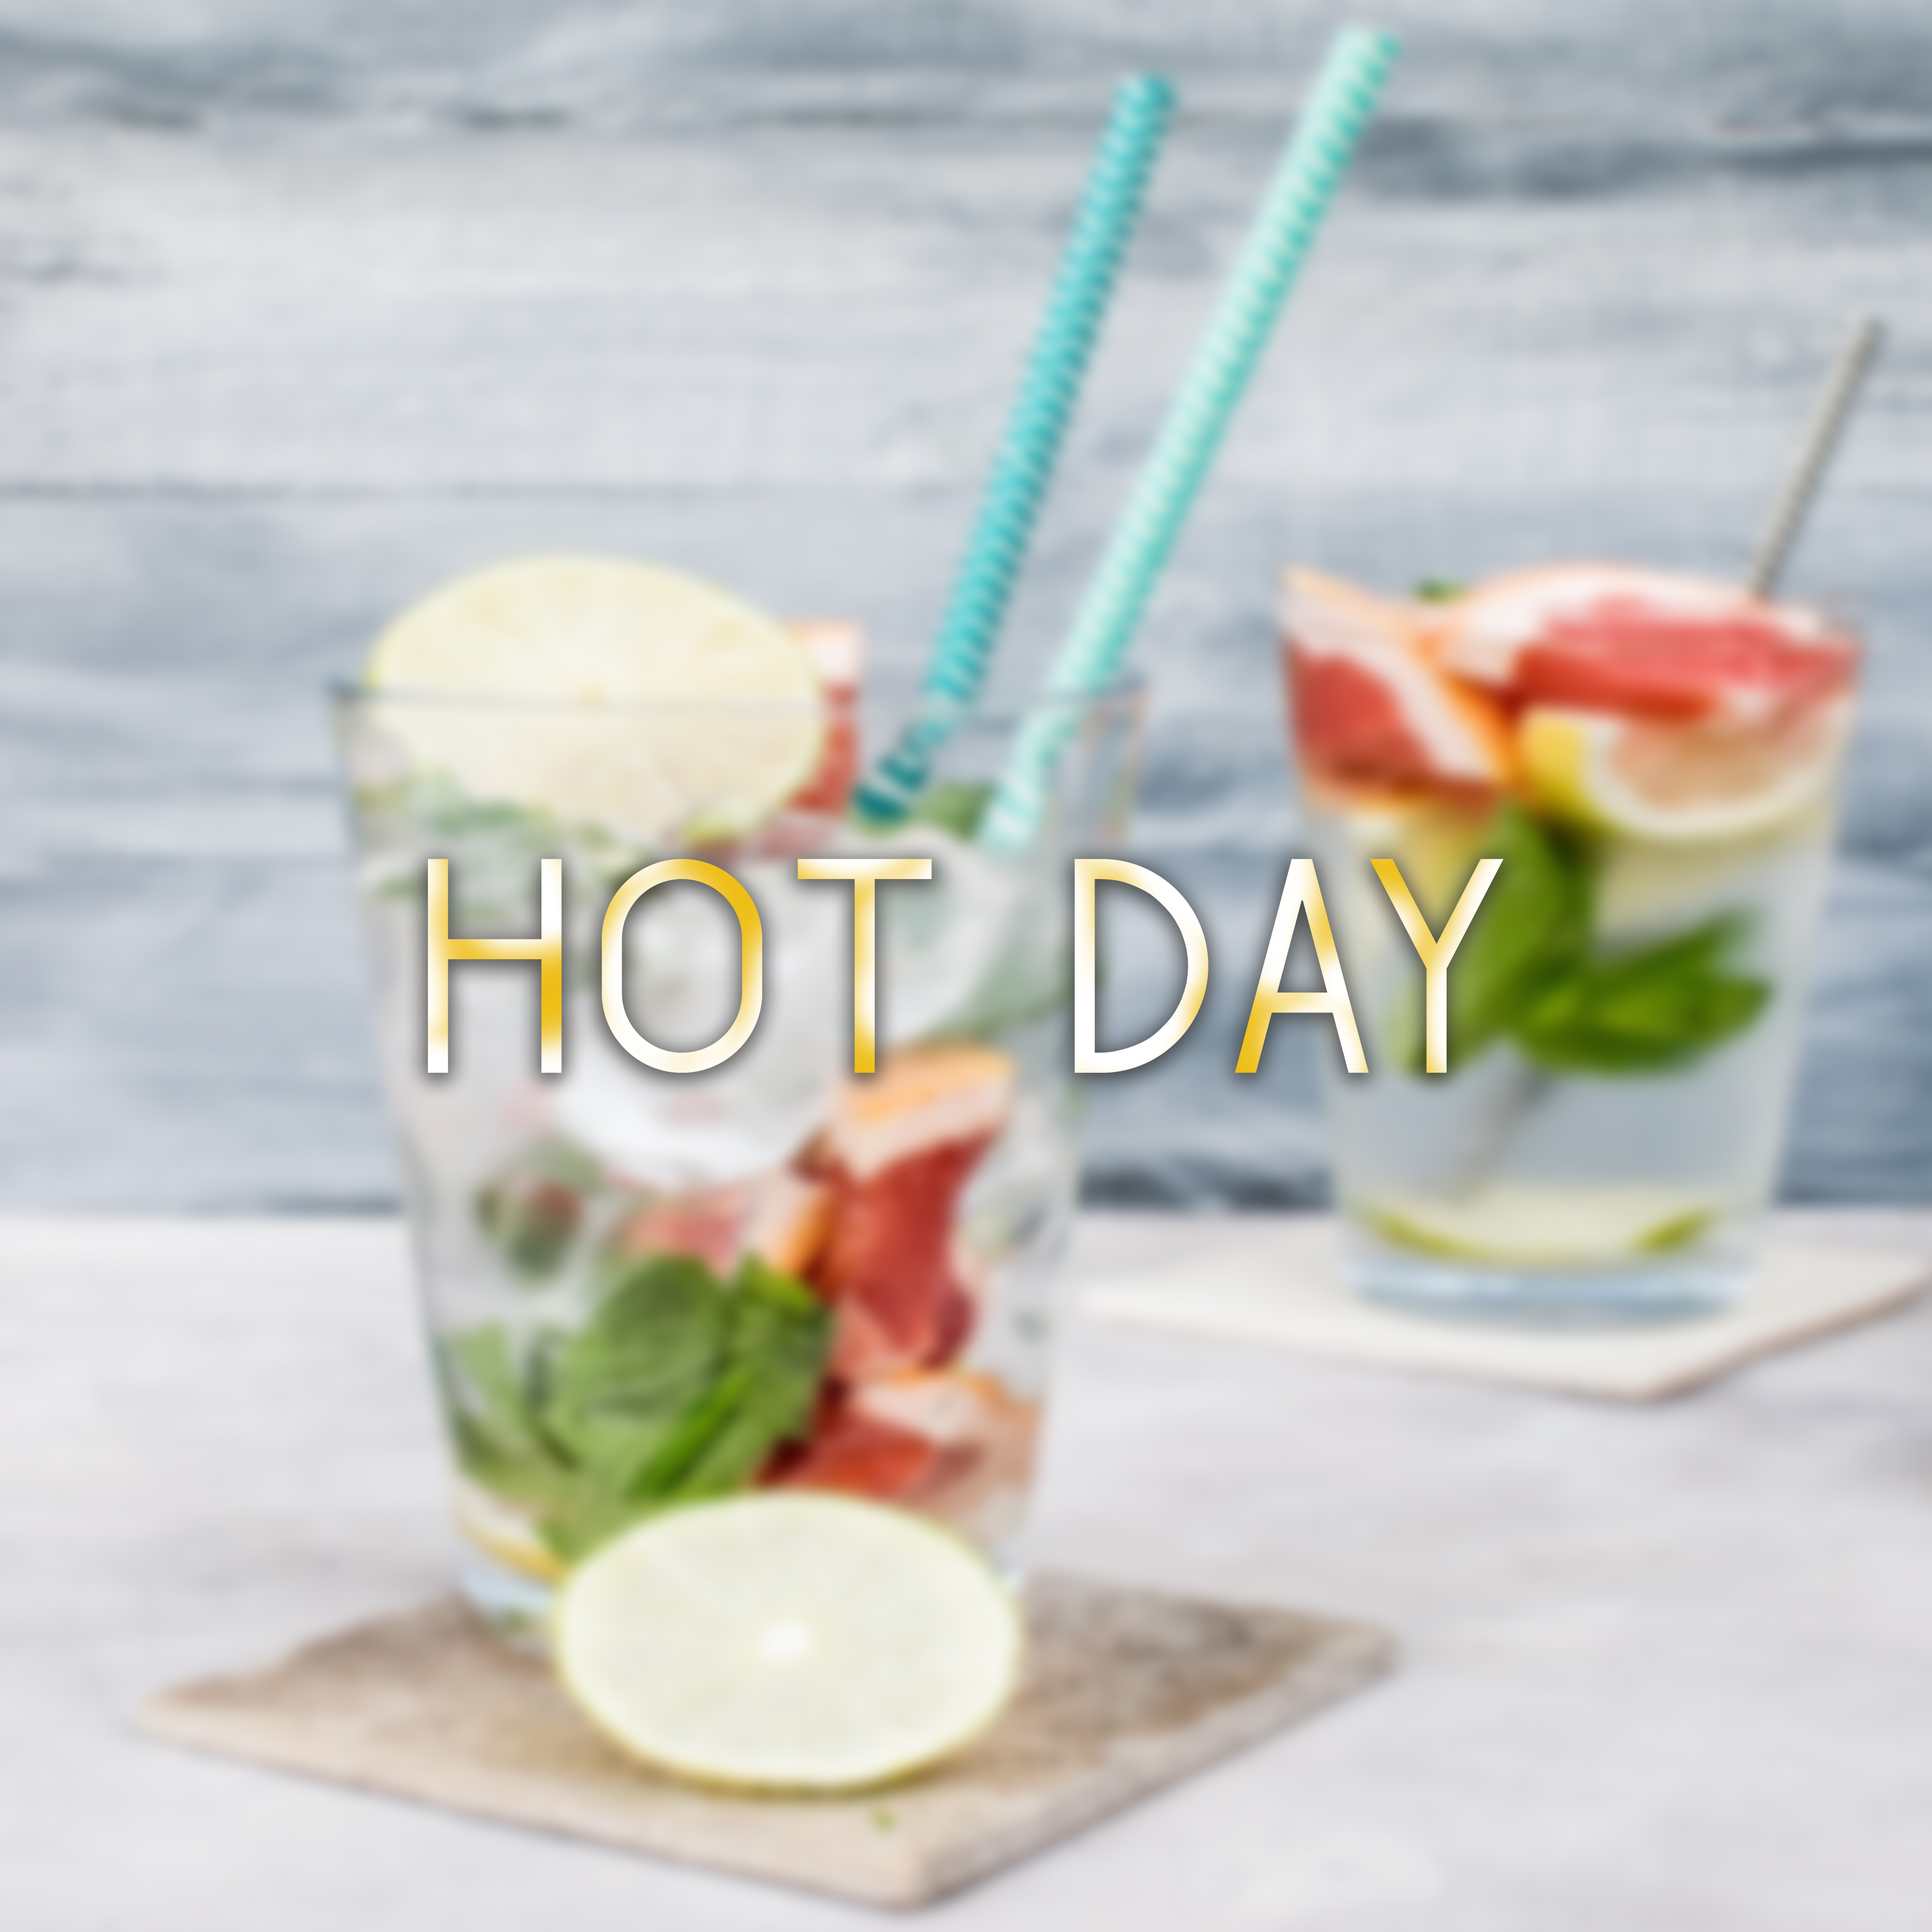 Hot Day – Summer Hits 2017, Colorful Drinks Under Palms, **** Vibes, Beach Party, Oxygen Bar